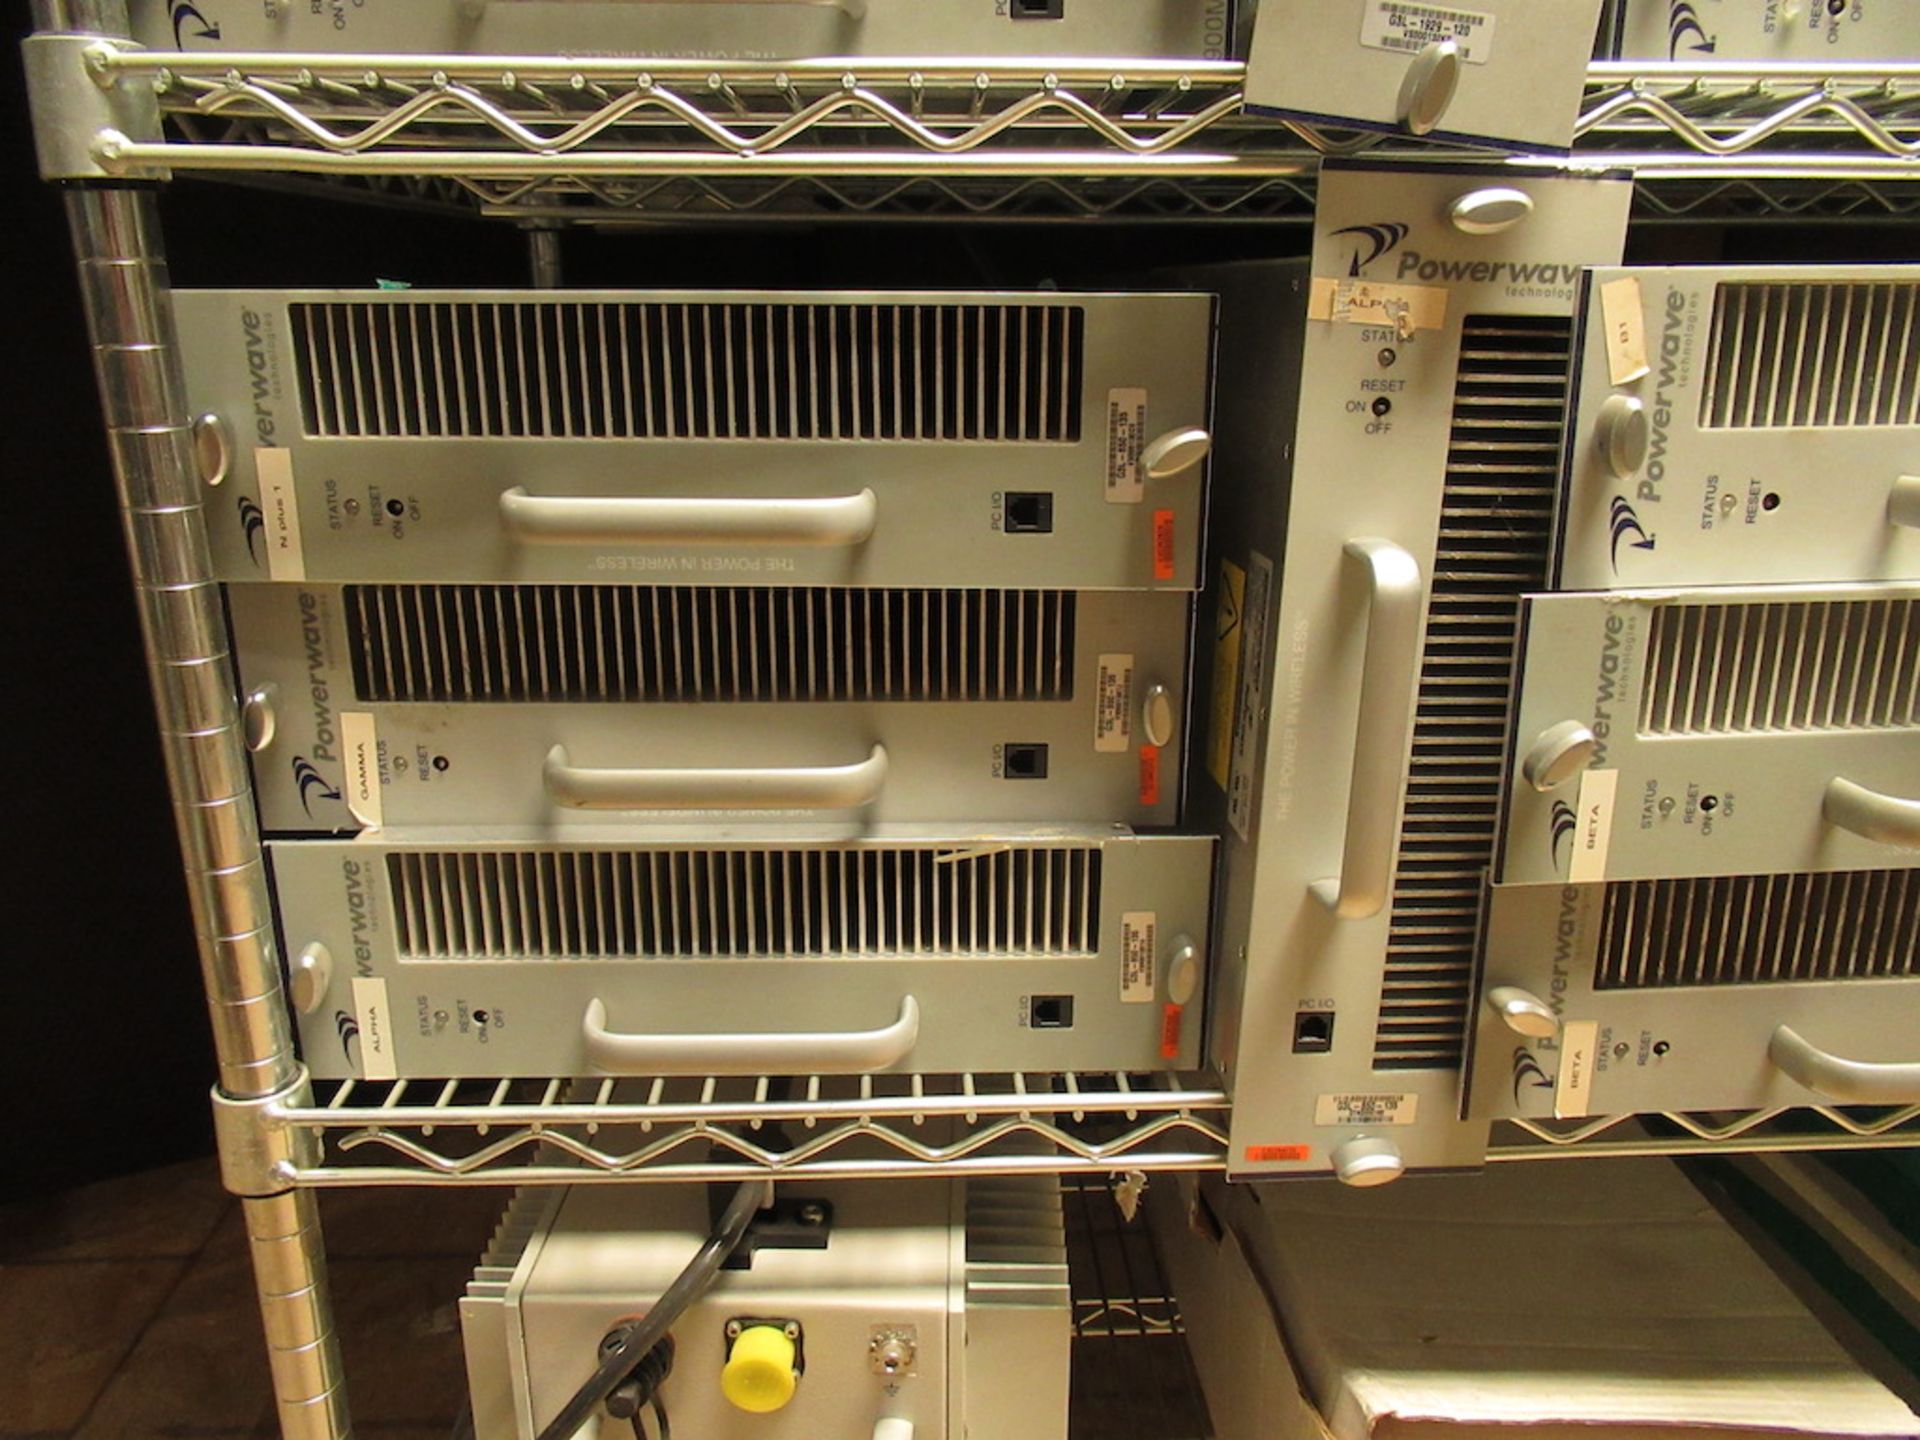 Lot to Include Entire Rack: (1) Powerwave 1 Command Combiner, (14) Powerwave G3L-1929-120, - Image 12 of 15